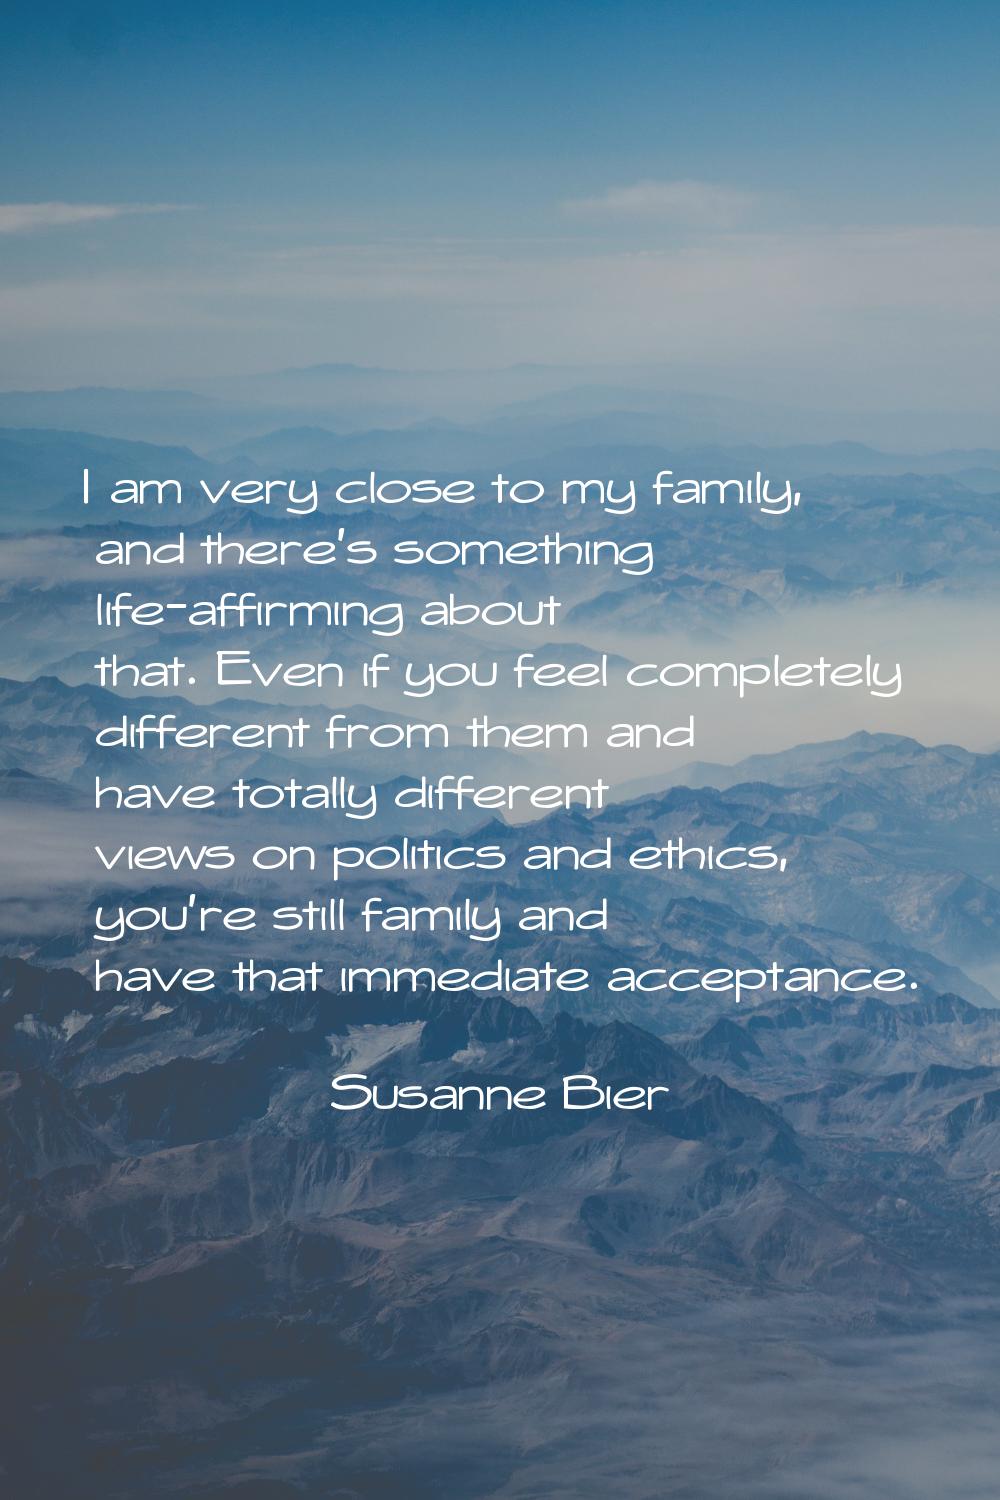 I am very close to my family, and there's something life-affirming about that. Even if you feel com